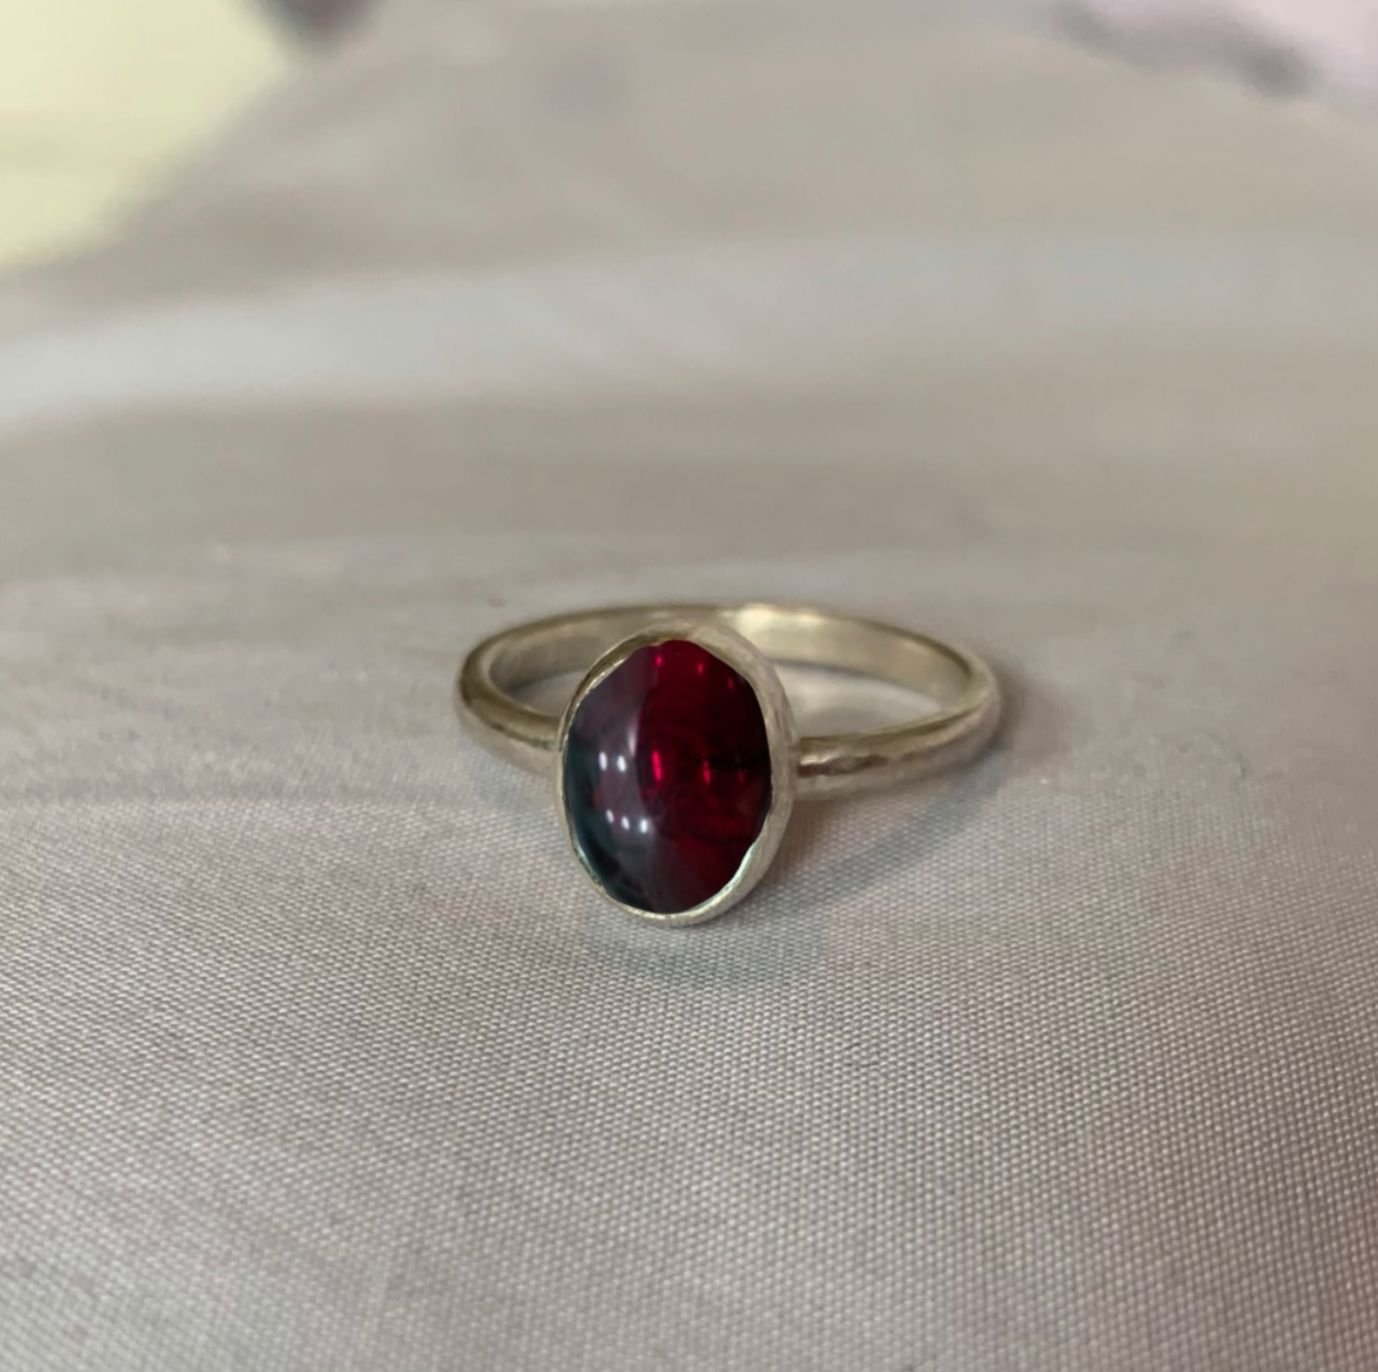 Large oval gemstone ring without engraving